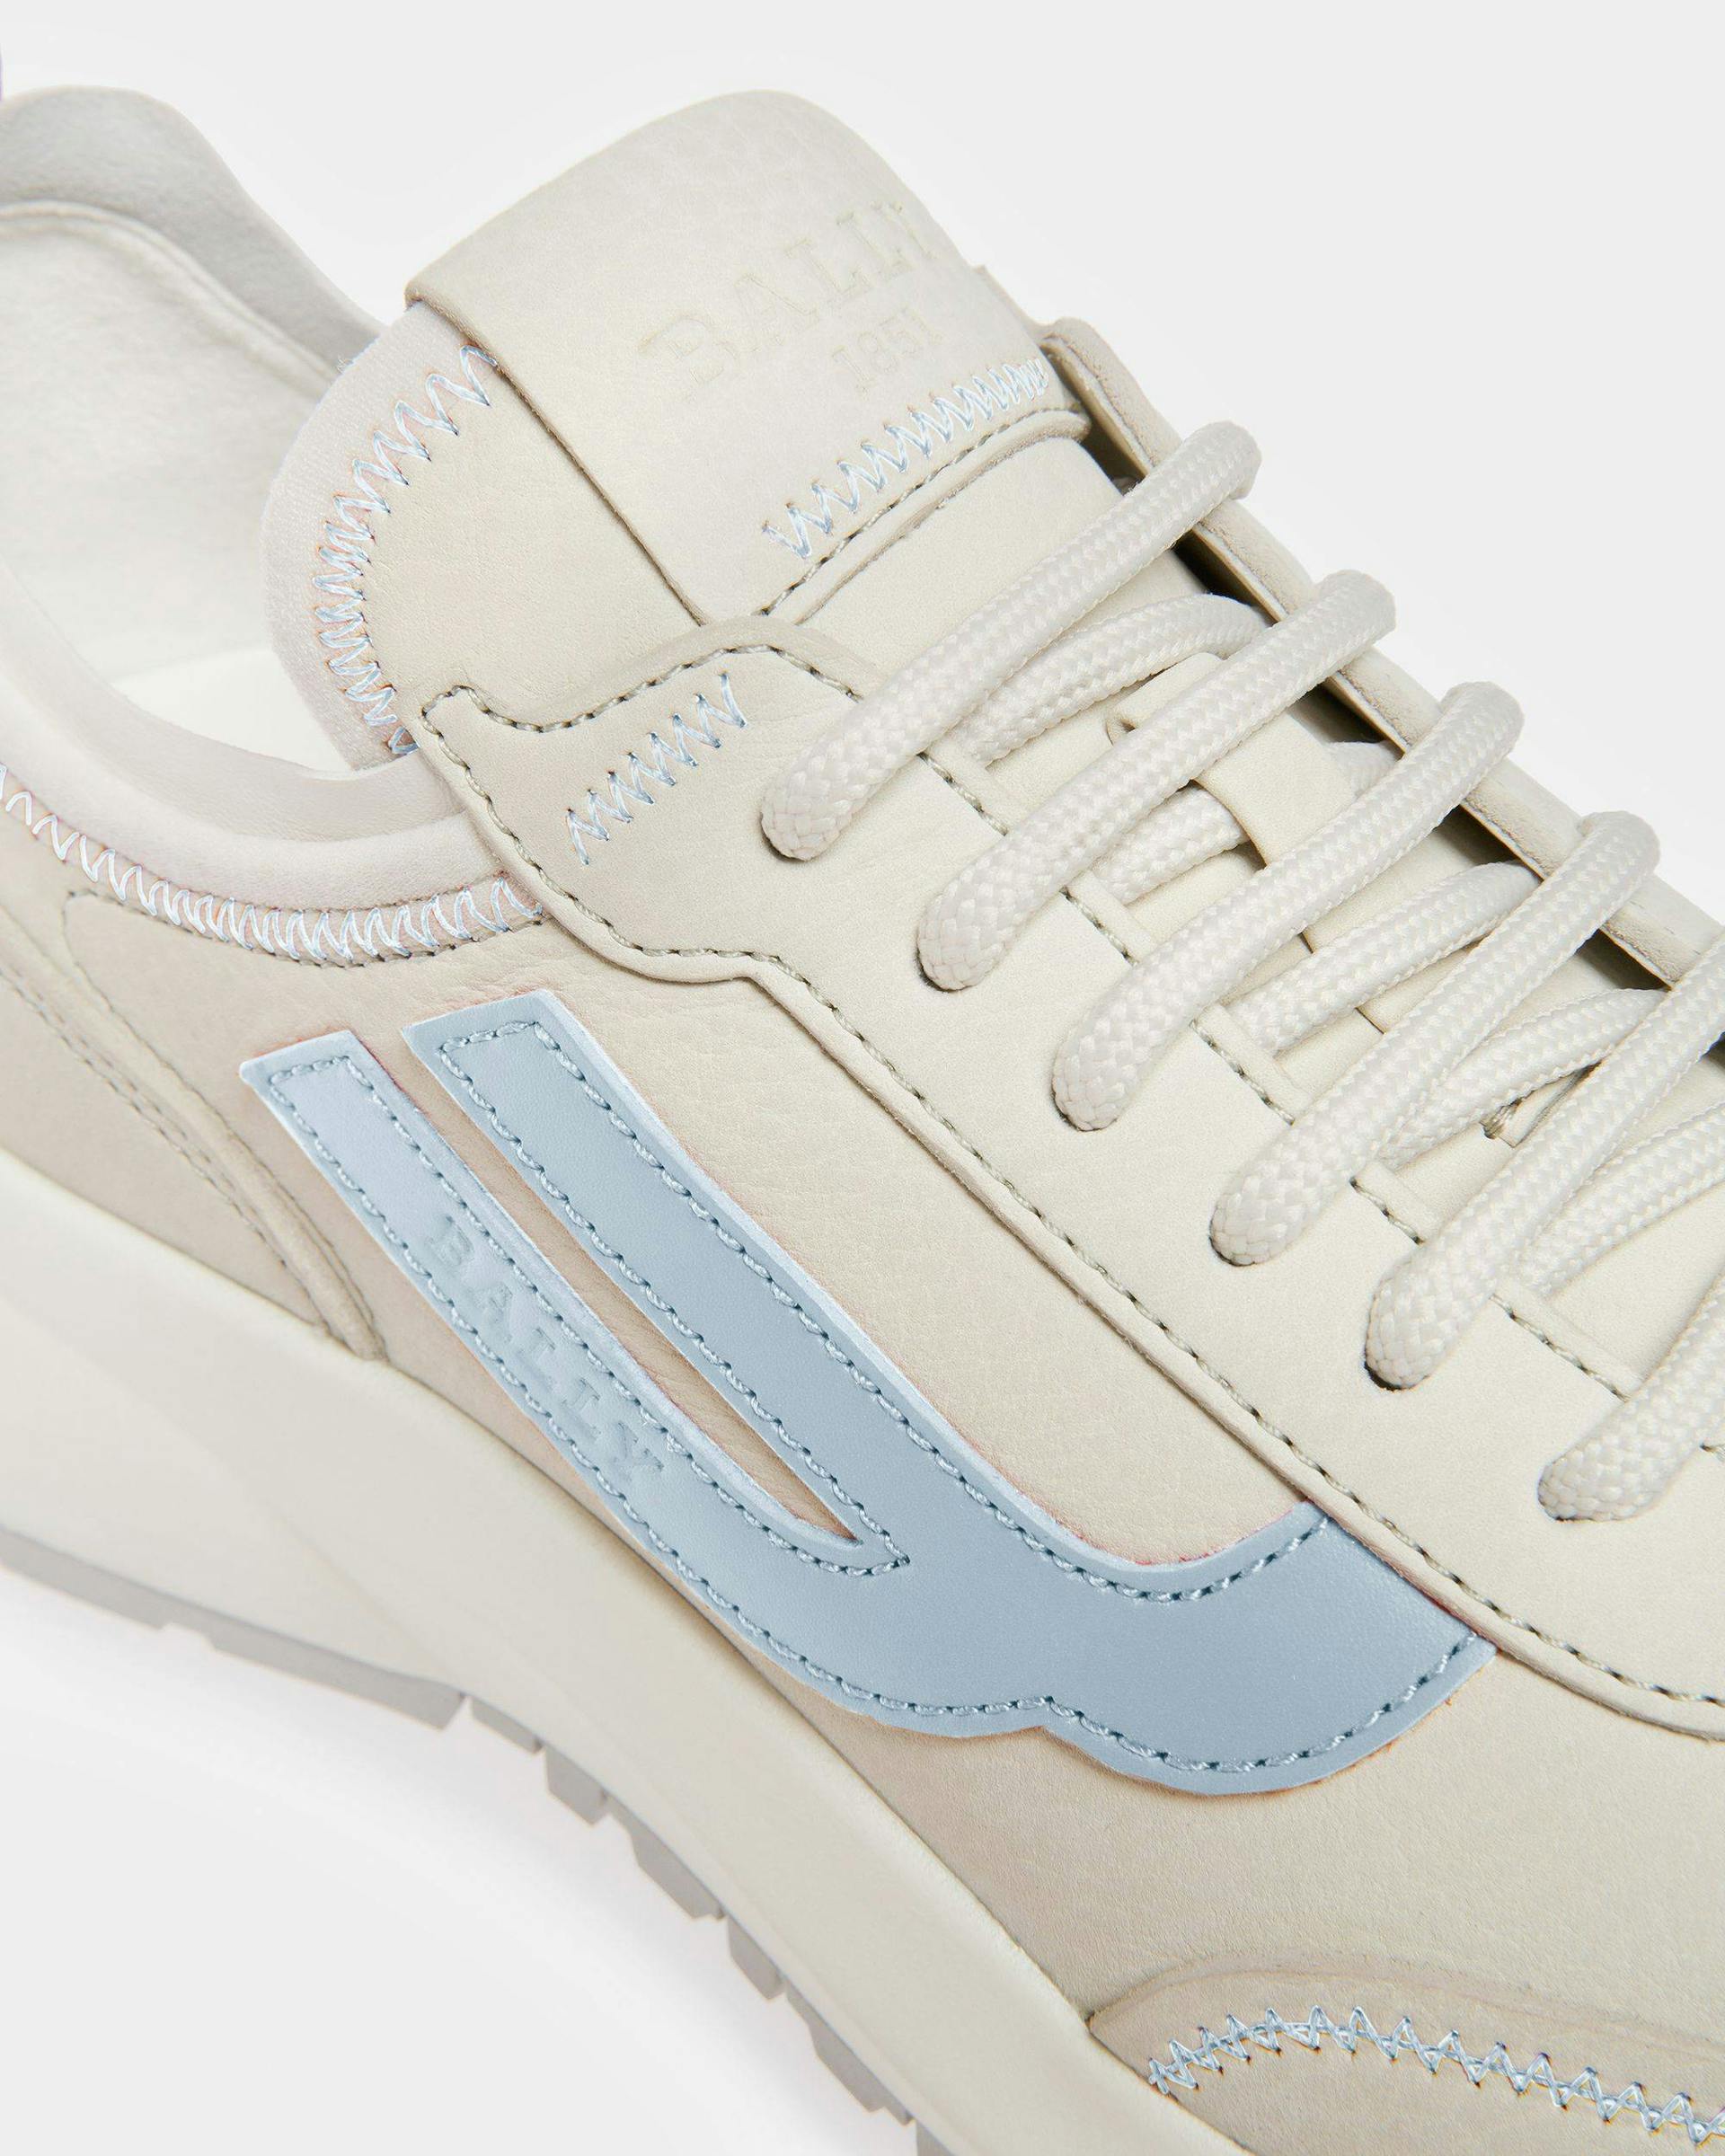 Darys Leather Sneakers In Dusty White And Light Blue - Women's - Bally - 04